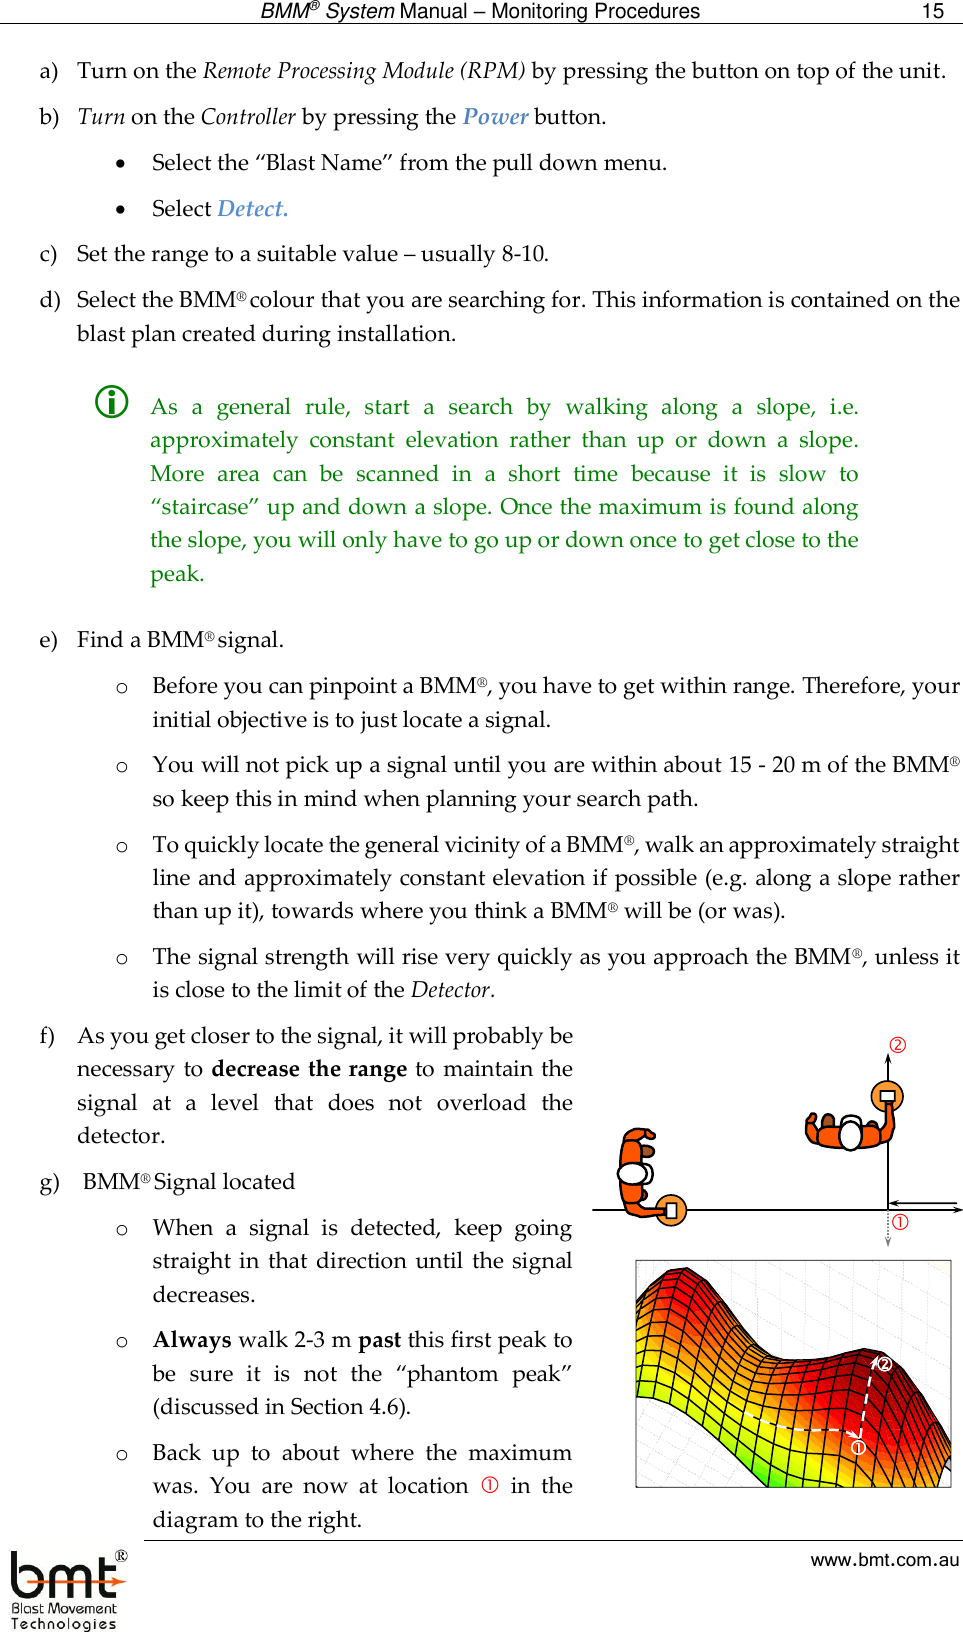  BMM® System Manual – Monitoring Procedures 15  www.bmt.com.au a) Turn on the Remote Processing Module (RPM) by pressing the button on top of the unit. b) Turn on the Controller by pressing the Power button.  Select the “Blast Name” from the pull down menu.   Select Detect.  c) Set the range to a suitable value – usually 8-10. d) Select the BMM® colour that you are searching for. This information is contained on the blast plan created during installation.   As  a  general  rule,  start  a  search  by  walking  along  a  slope,  i.e. approximately  constant  elevation  rather  than  up  or  down  a  slope. More  area  can  be  scanned  in  a  short  time  because  it  is  slow  to “staircase” up and down a slope. Once the maximum is found along the slope, you will only have to go up or down once to get close to the peak.  e) Find a BMM® signal. o Before you can pinpoint a BMM®, you have to get within range. Therefore, your initial objective is to just locate a signal.  o You will not pick up a signal until you are within about 15 - 20 m of the BMM® so keep this in mind when planning your search path.  o To quickly locate the general vicinity of a BMM®, walk an approximately straight line and approximately constant elevation if possible (e.g. along a slope rather than up it), towards where you think a BMM® will be (or was).  o The signal strength will rise very quickly as you approach the BMM®, unless it is close to the limit of the Detector. f) As you get closer to the signal, it will probably be necessary to decrease the range to maintain the signal  at  a  level  that  does  not  overload  the detector. g)  BMM® Signal located o When  a  signal  is  detected,  keep  going straight in  that  direction until  the  signal decreases.  o Always walk 2-3 m past this first peak to be  sure  it  is  not  the  “phantom  peak” (discussed in Section 4.6). o Back  up  to  about  where  the  maximum was.  You  are  now  at  location    in  the diagram to the right.  3D Surface Plot (Survey Points in Results - Survey Both.stw 4v*98c)mV = Distance Weighted Least Squares 250  200  150  100  50  0  -50 